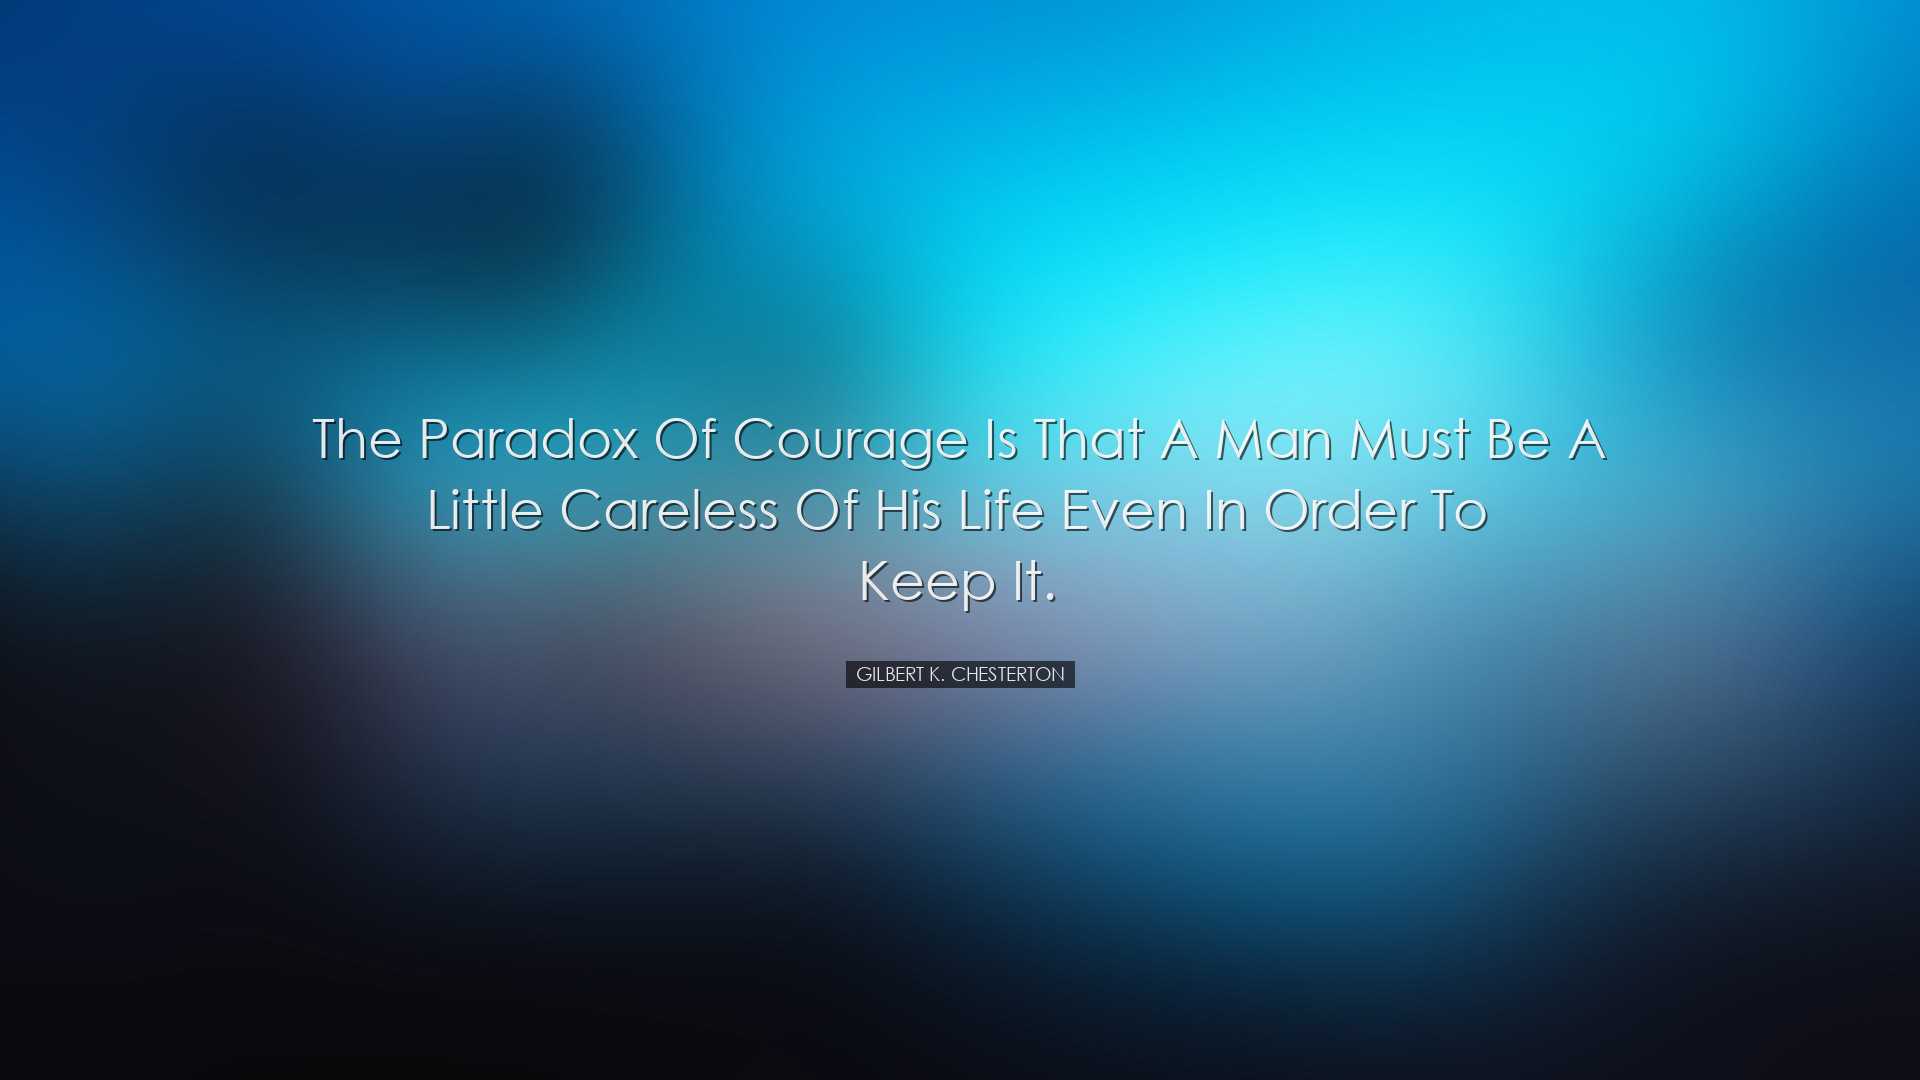 The paradox of courage is that a man must be a little careless of